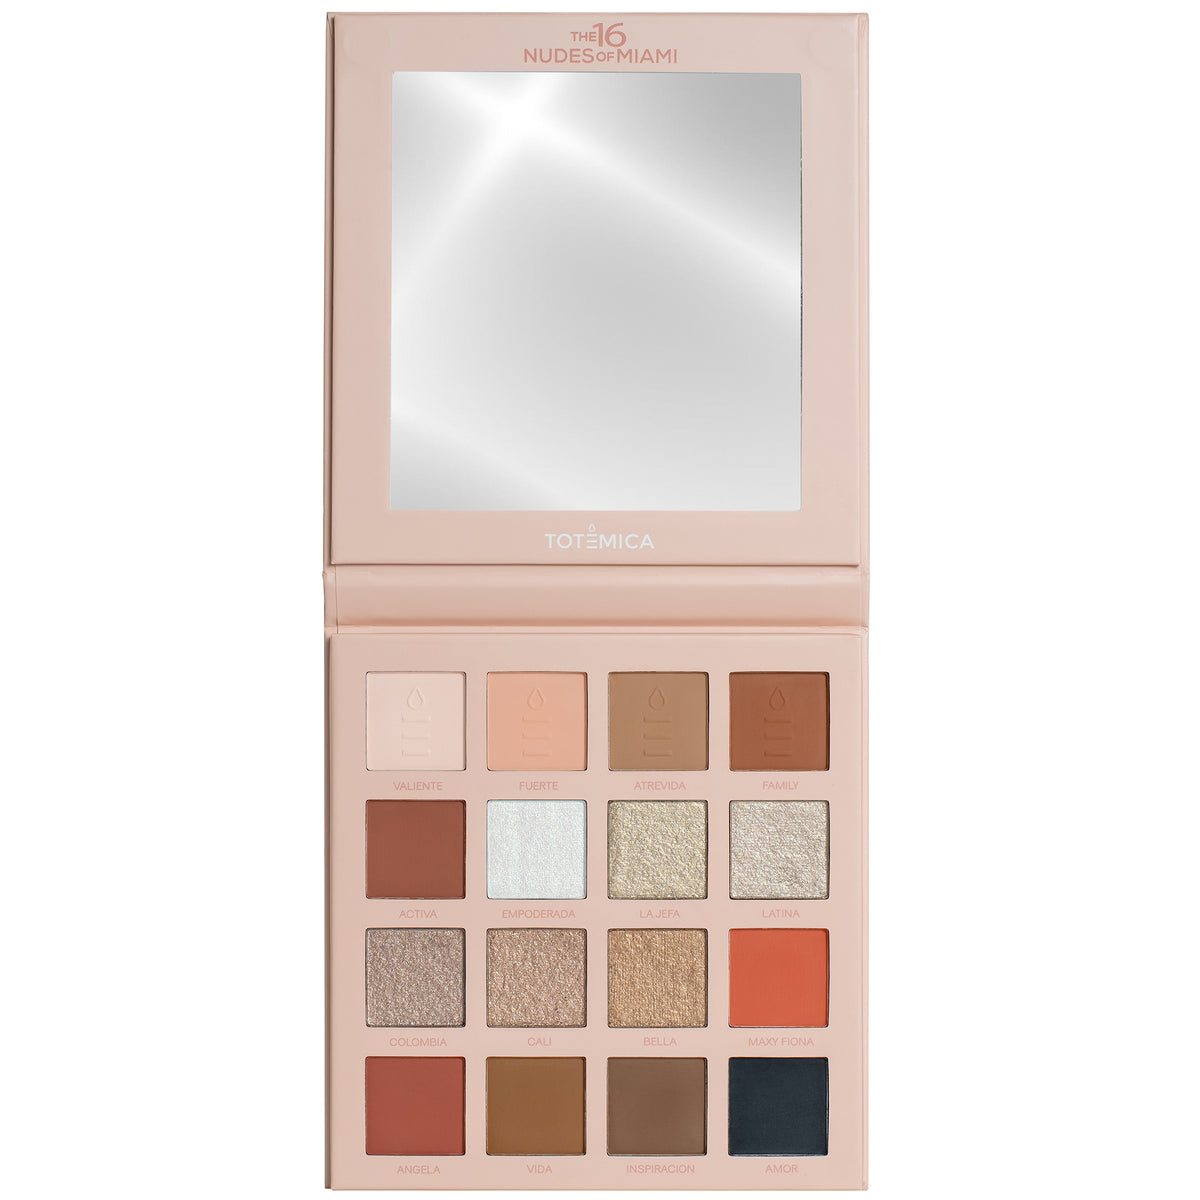 Palette | Totemica Makeup - 16 Wholesale Miami Of Nudes The